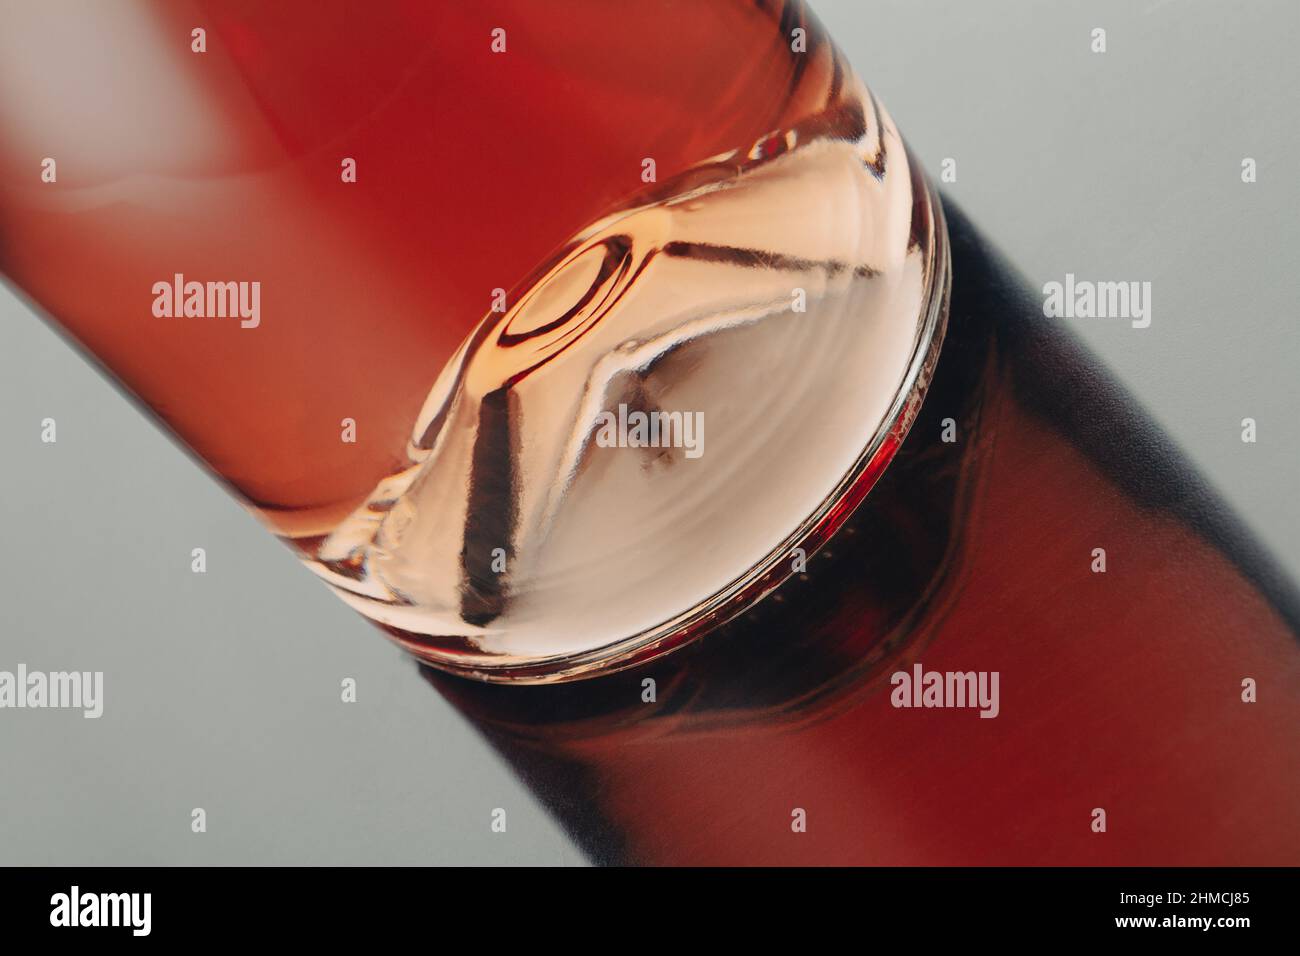 front view closeup of a rose wine bottle punt with reflection on shiny surface Stock Photo